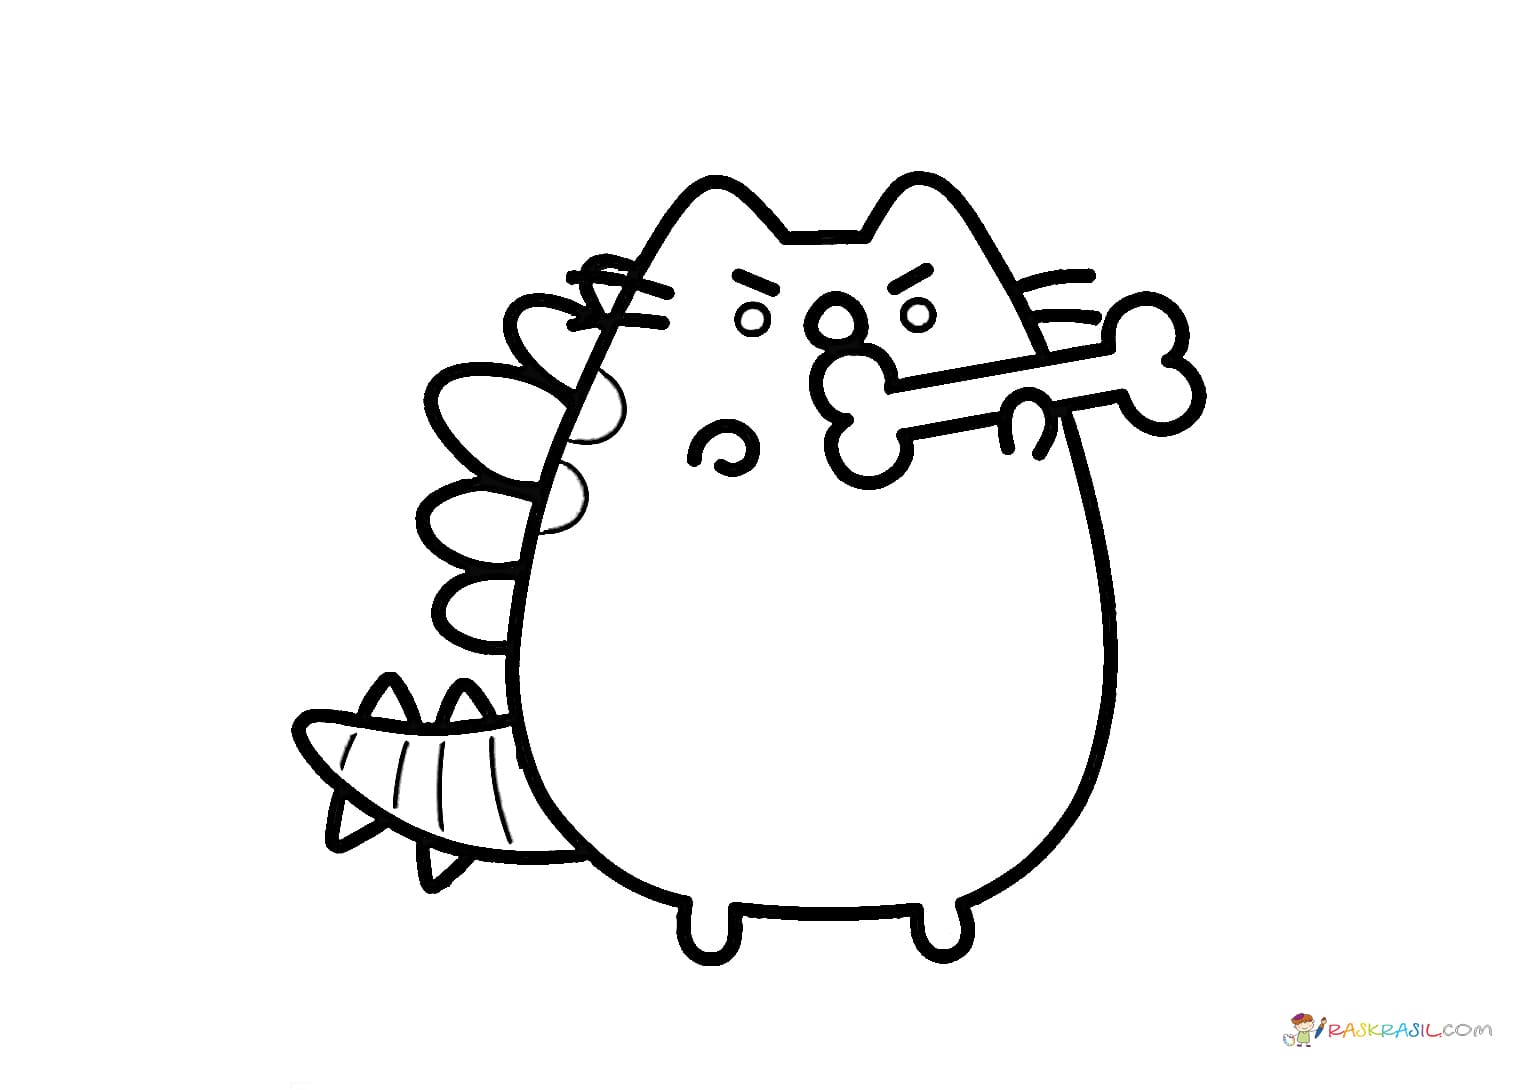 26 Best Ideas For Coloring Printable Pusheen Pictures